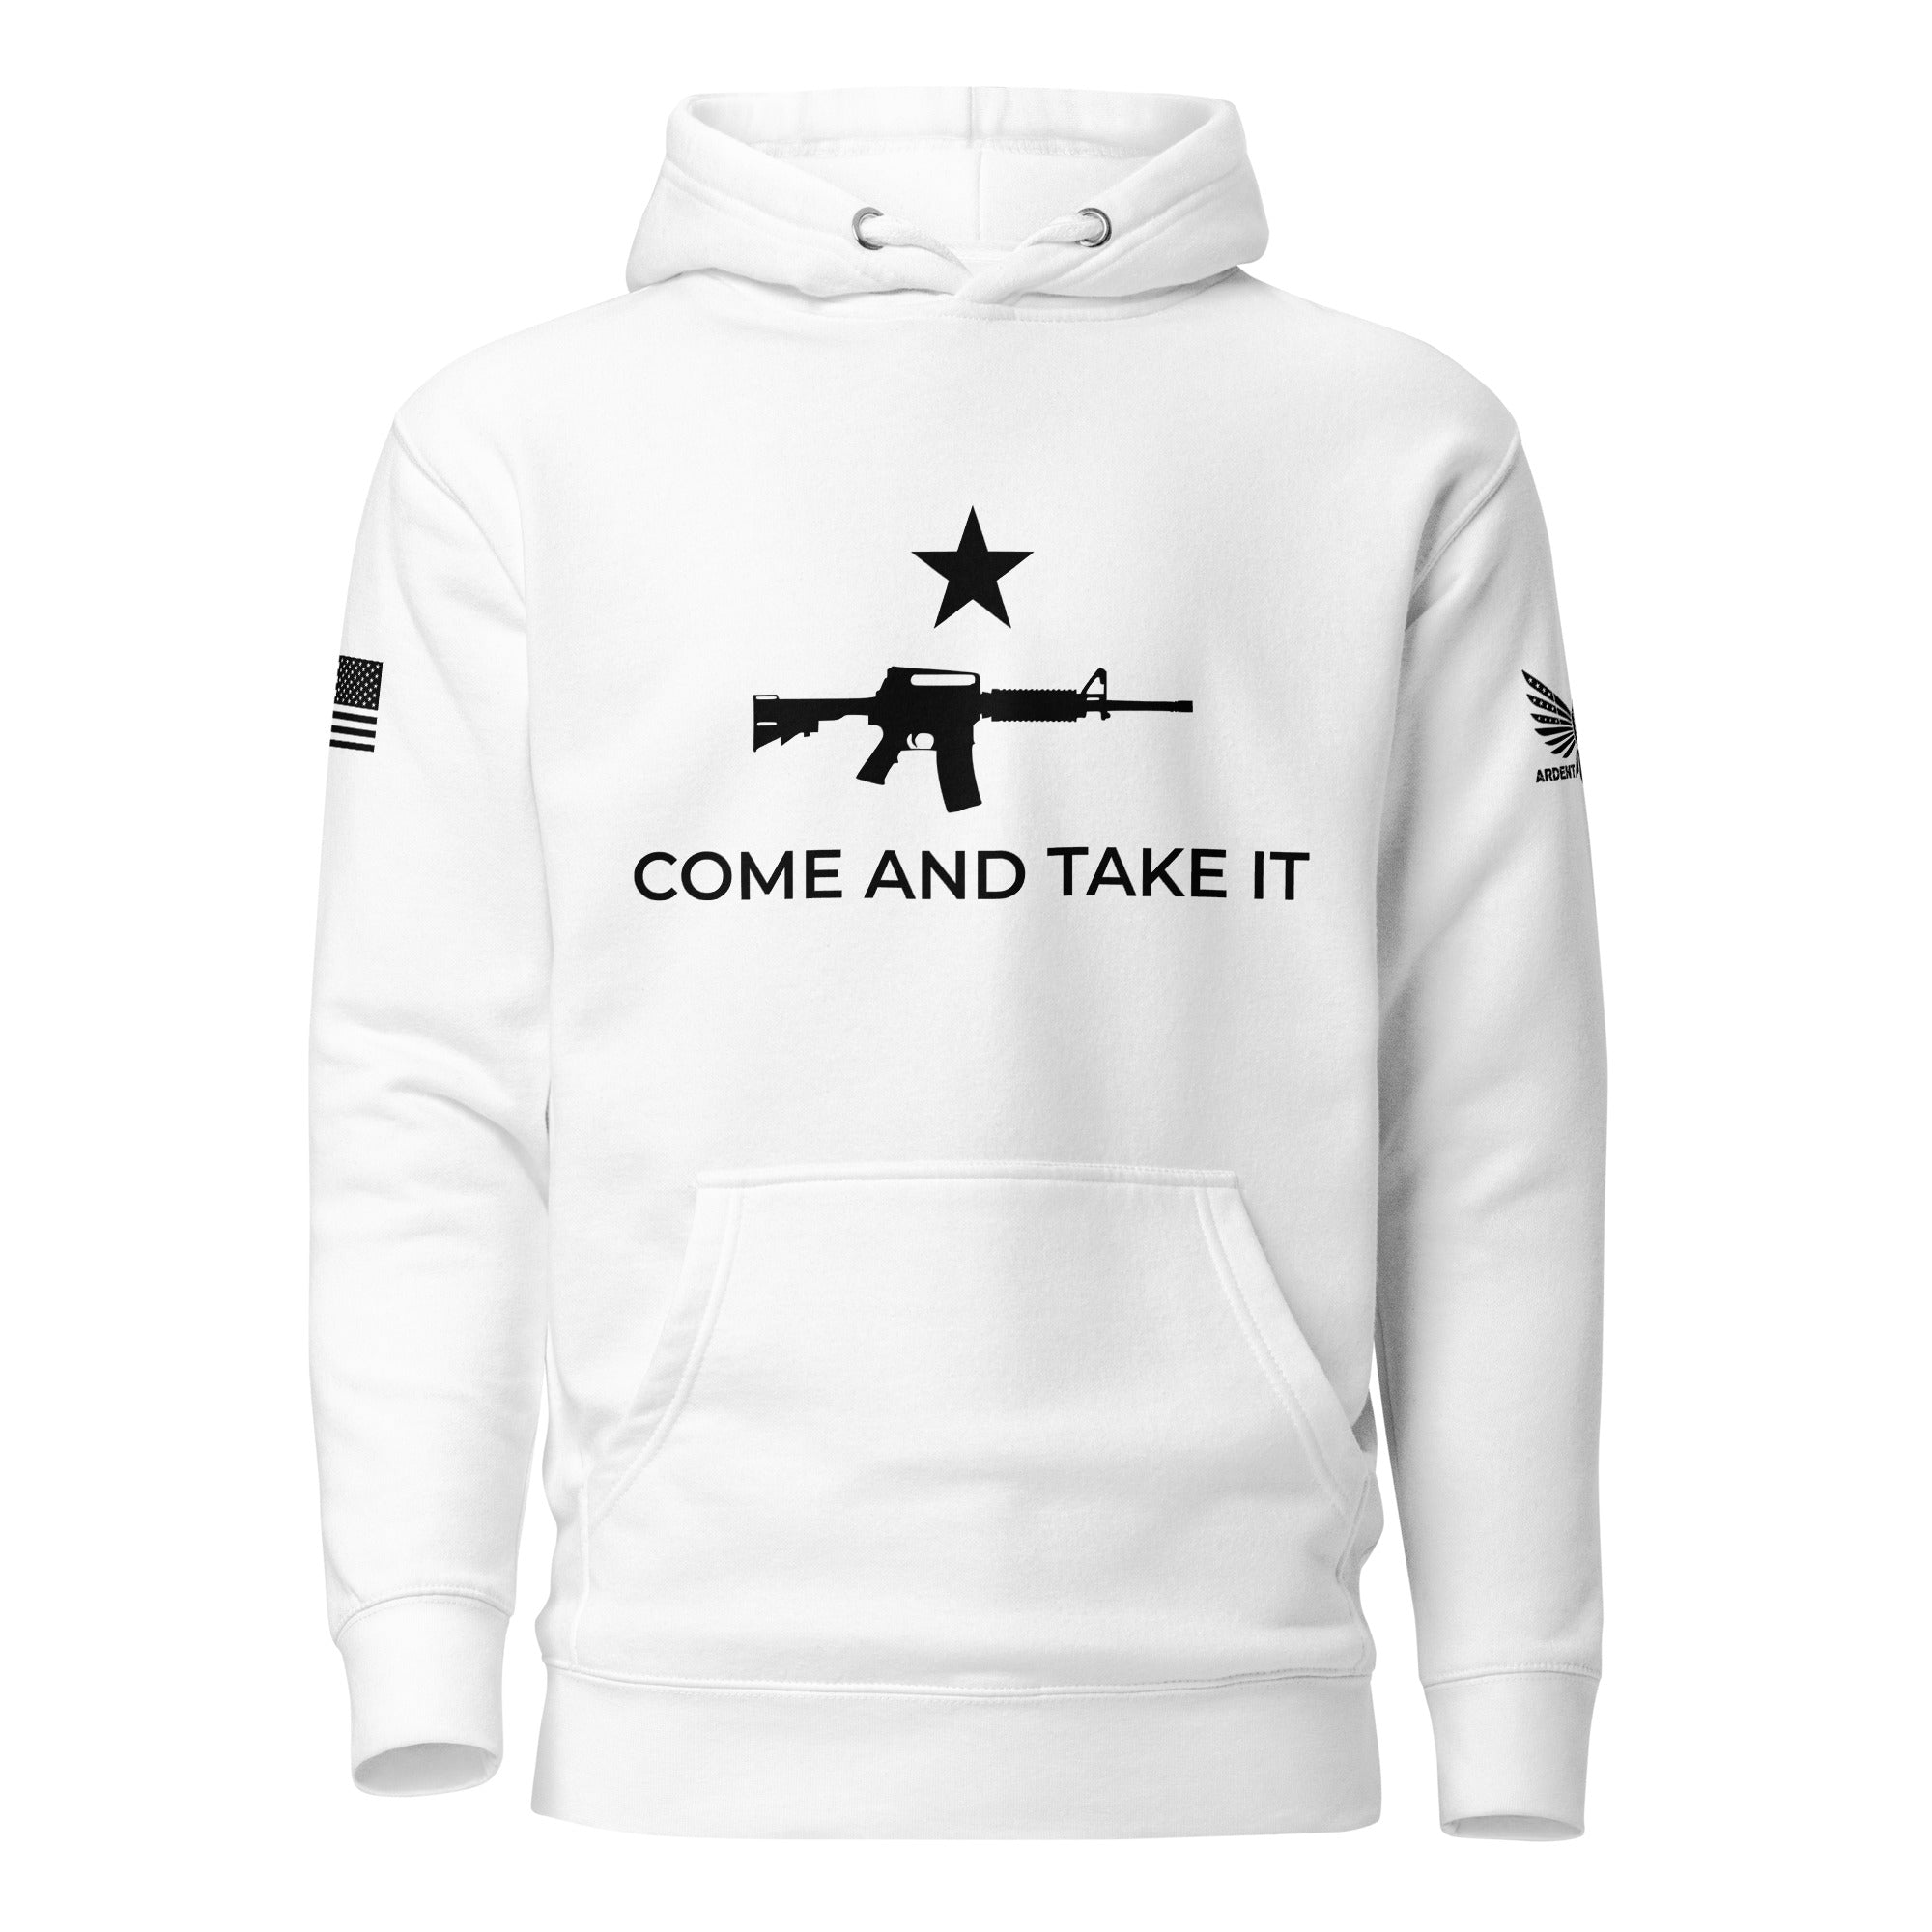 Come And Take It Hoodie-Premium Hoodie-White-S-Ardent Patriot Apparel Co.